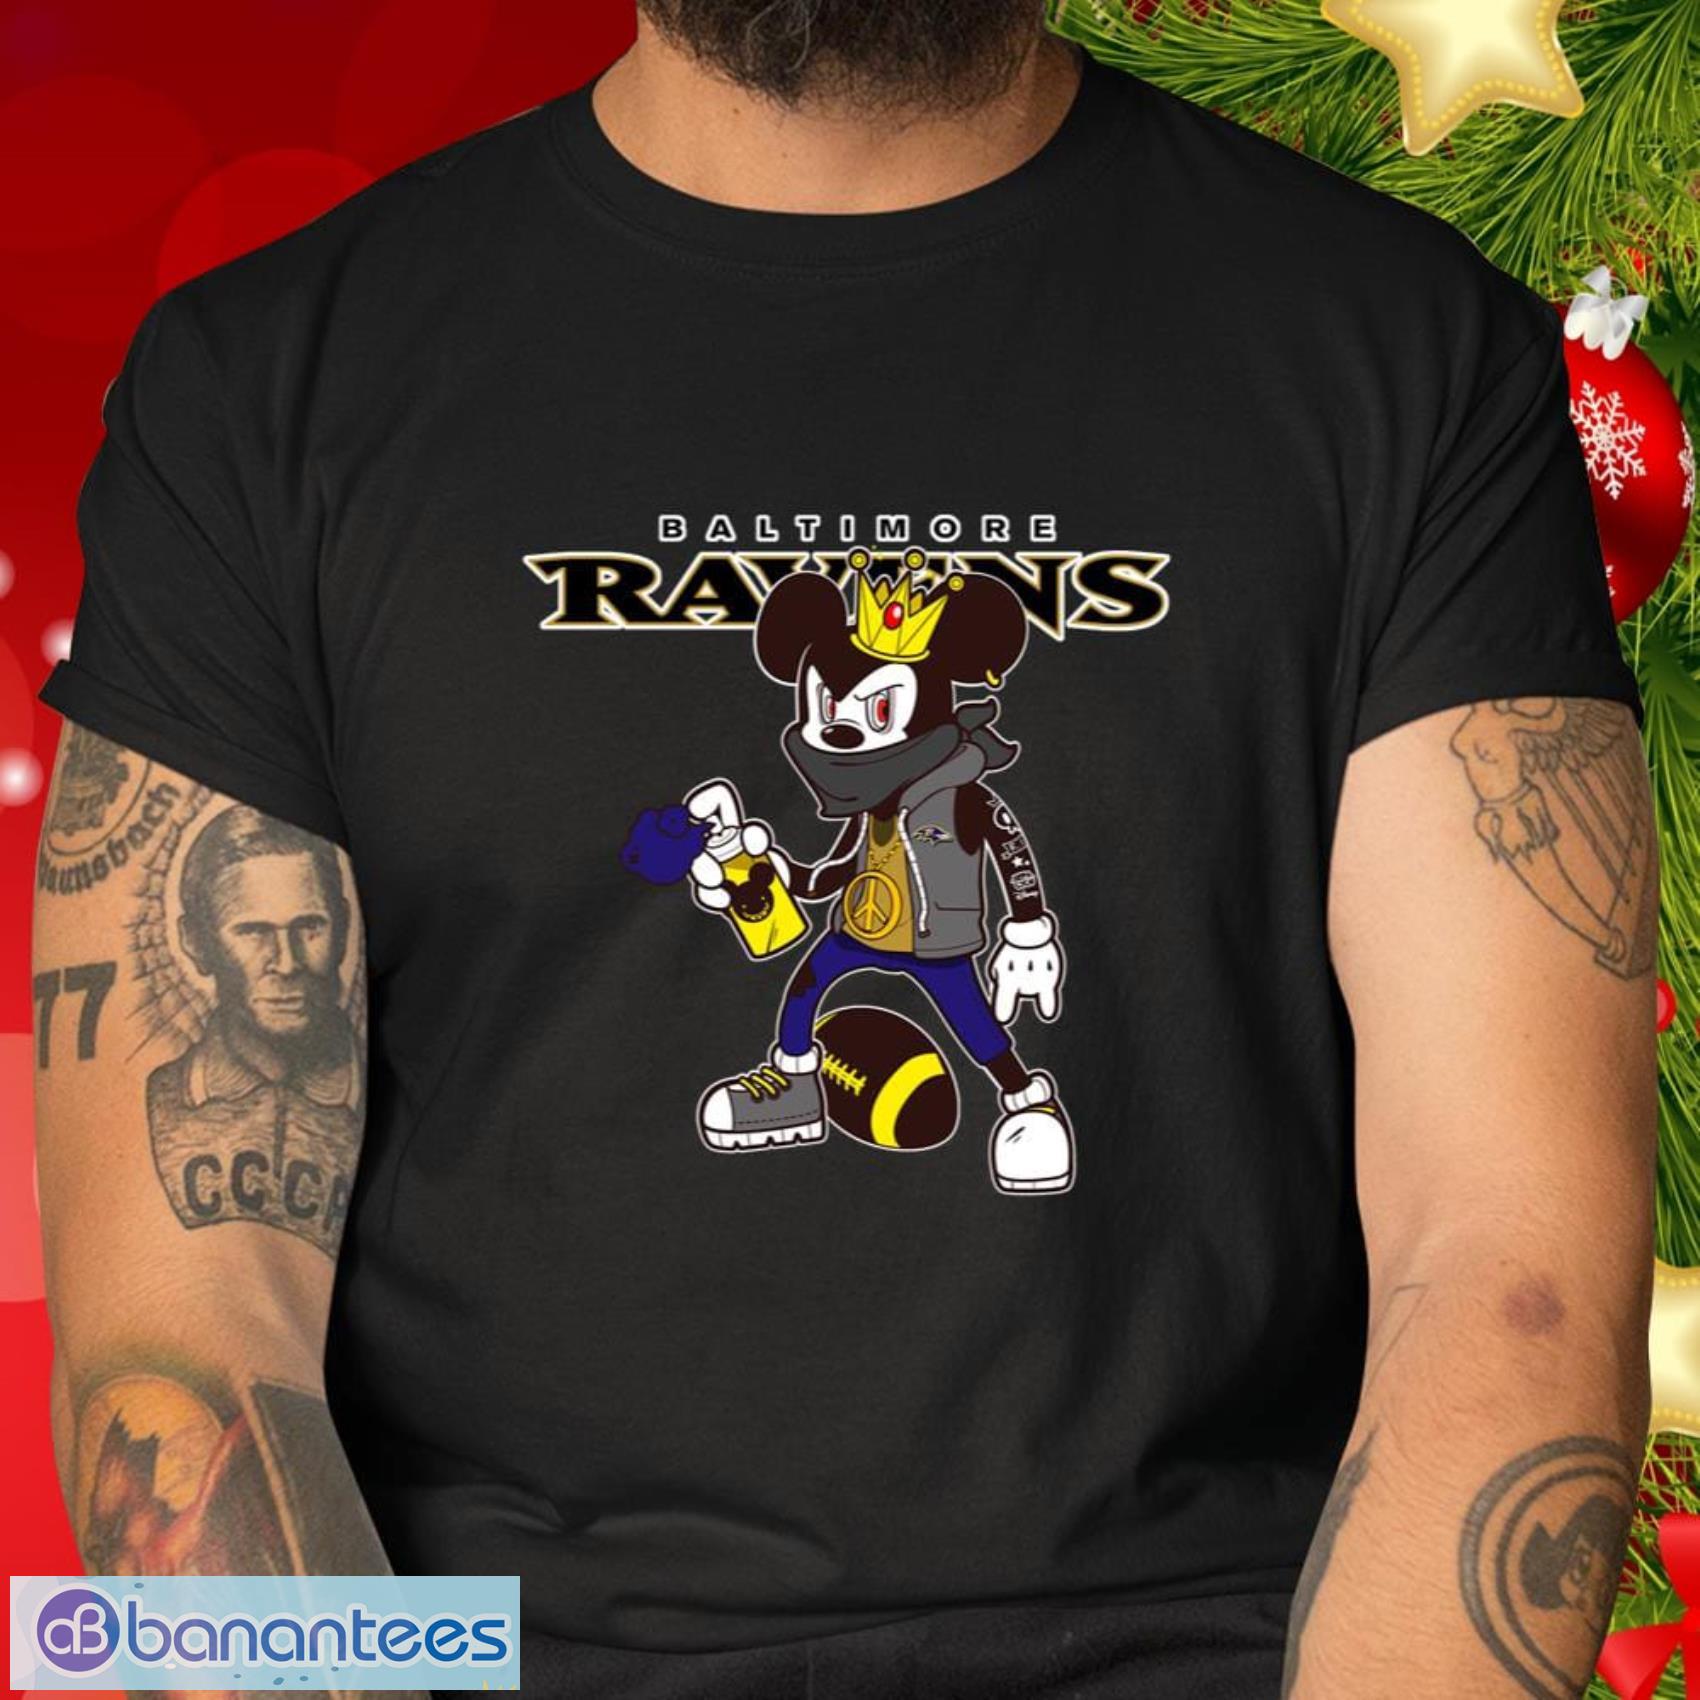 Baltimore Ravens NFL Football Gift Fr Fans Mickey Peace Sign Sports T Shirt - Baltimore Ravens NFL Football Mickey Peace Sign Sports T Shirt_2